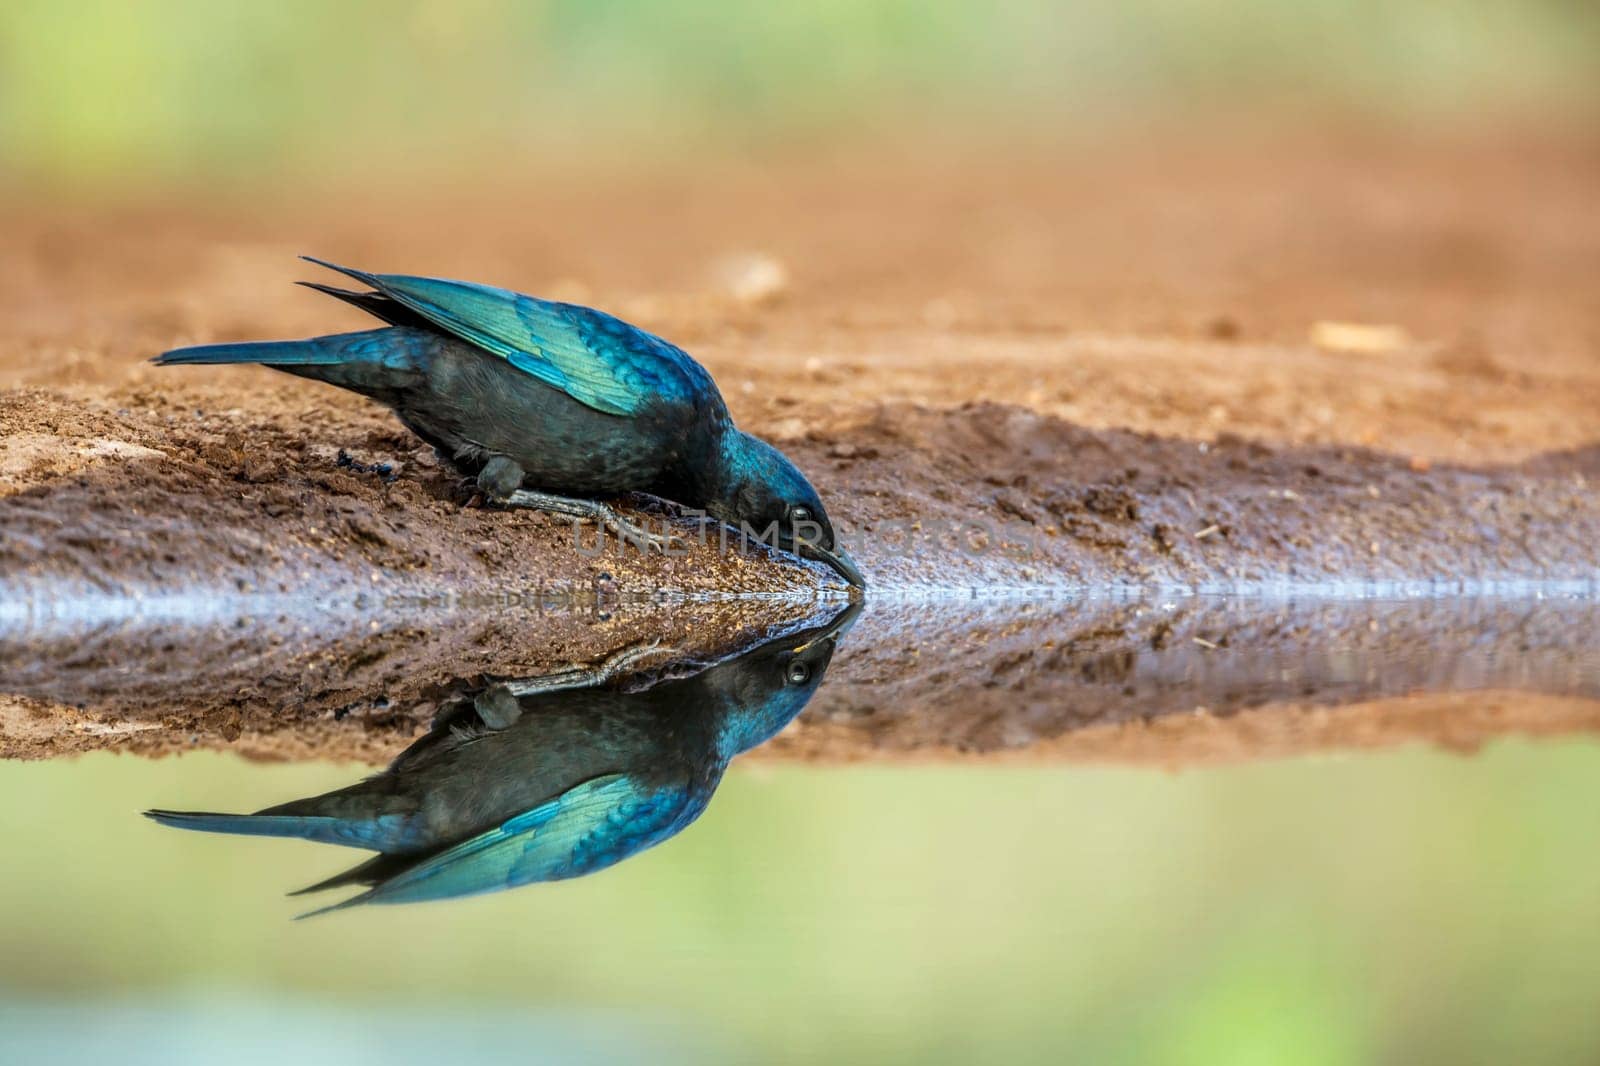 Cape glossy starling in Kruger National park, South Africa by PACOCOMO